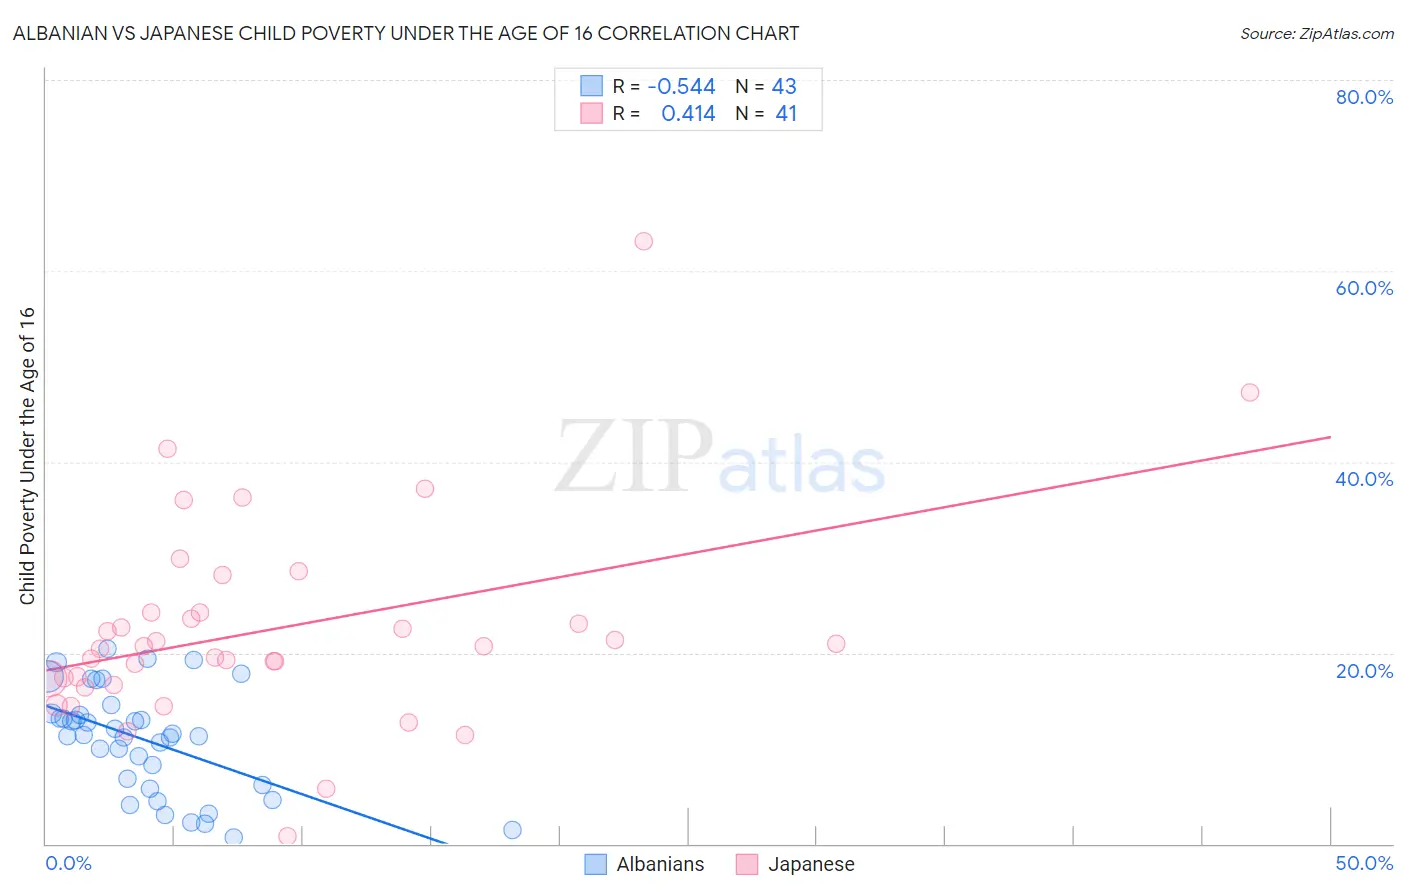 Albanian vs Japanese Child Poverty Under the Age of 16